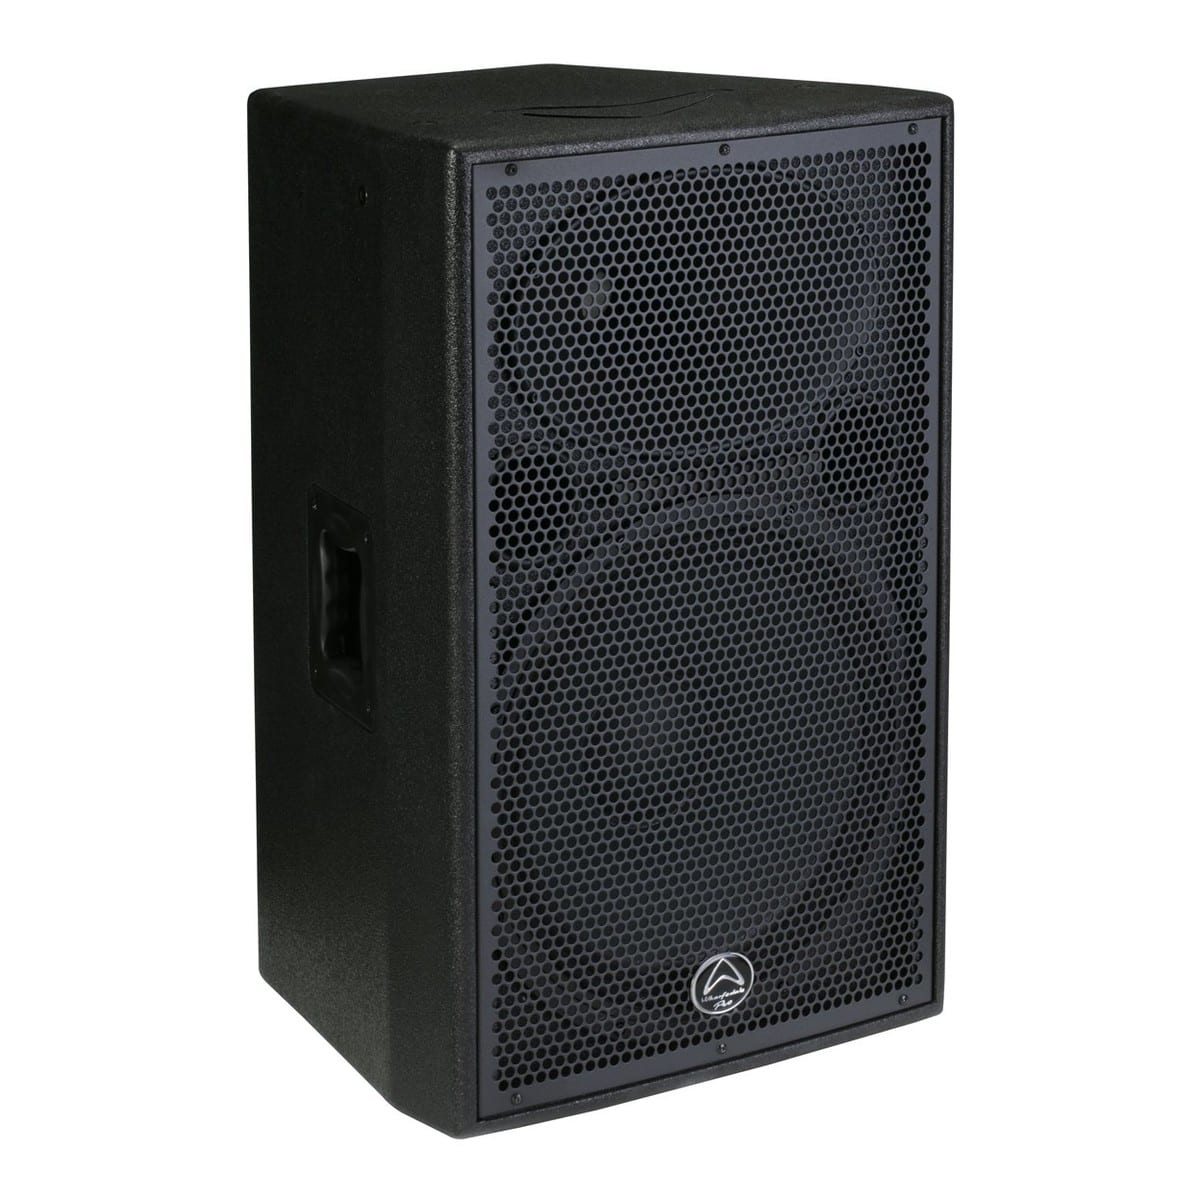 Wharfedale PRO Delta X15 at Bounce Online R6,225.00